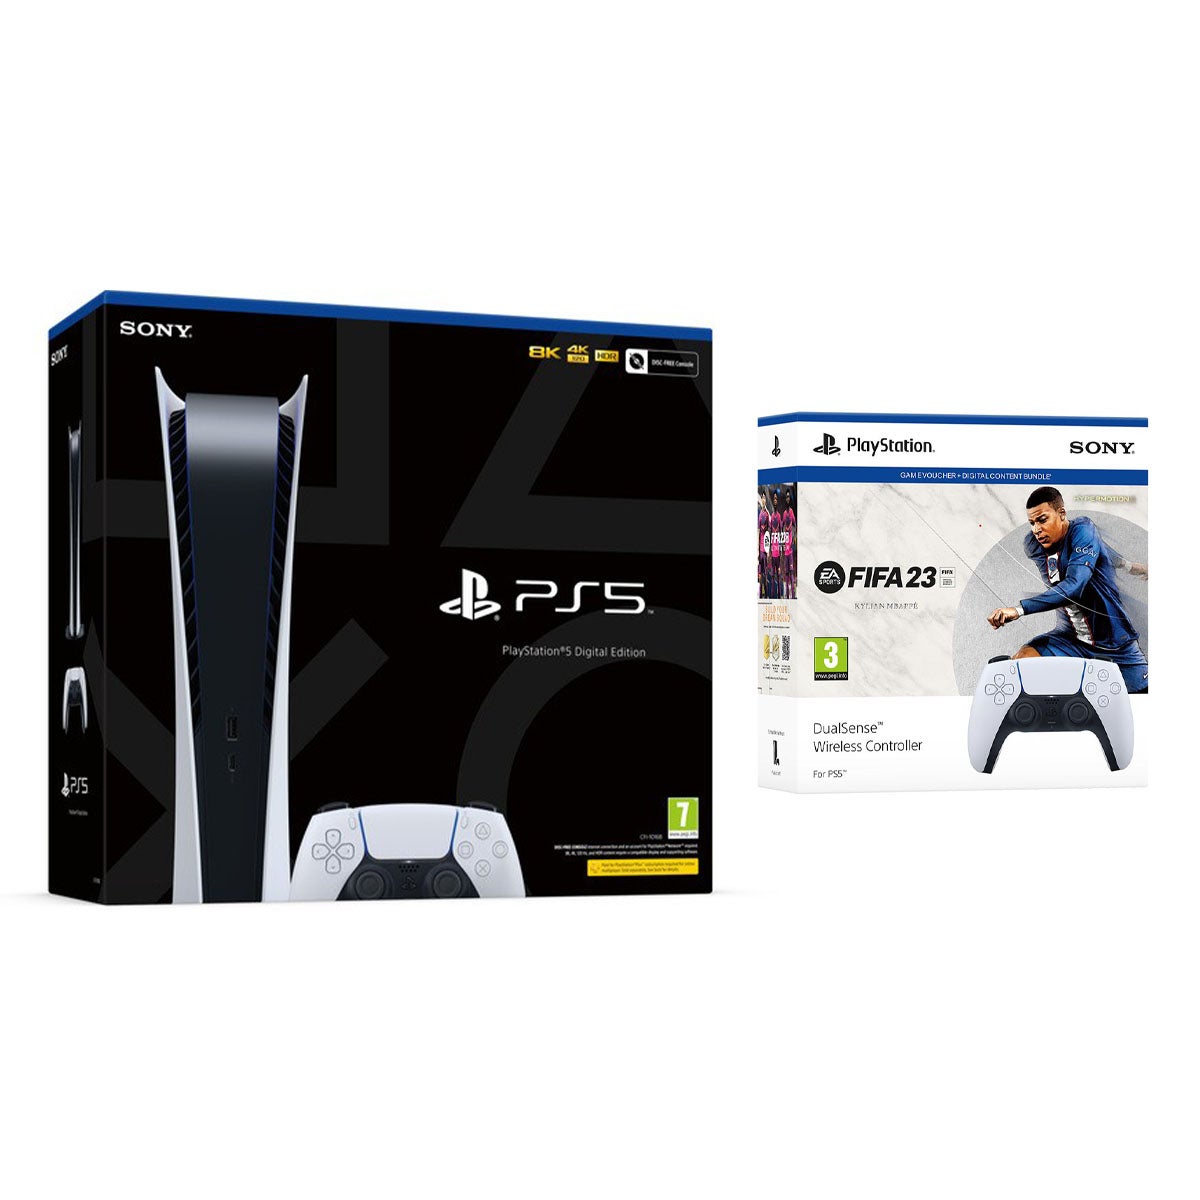 Incredible PS5 controller bundle deal plus Fifa 23 for just £69 is